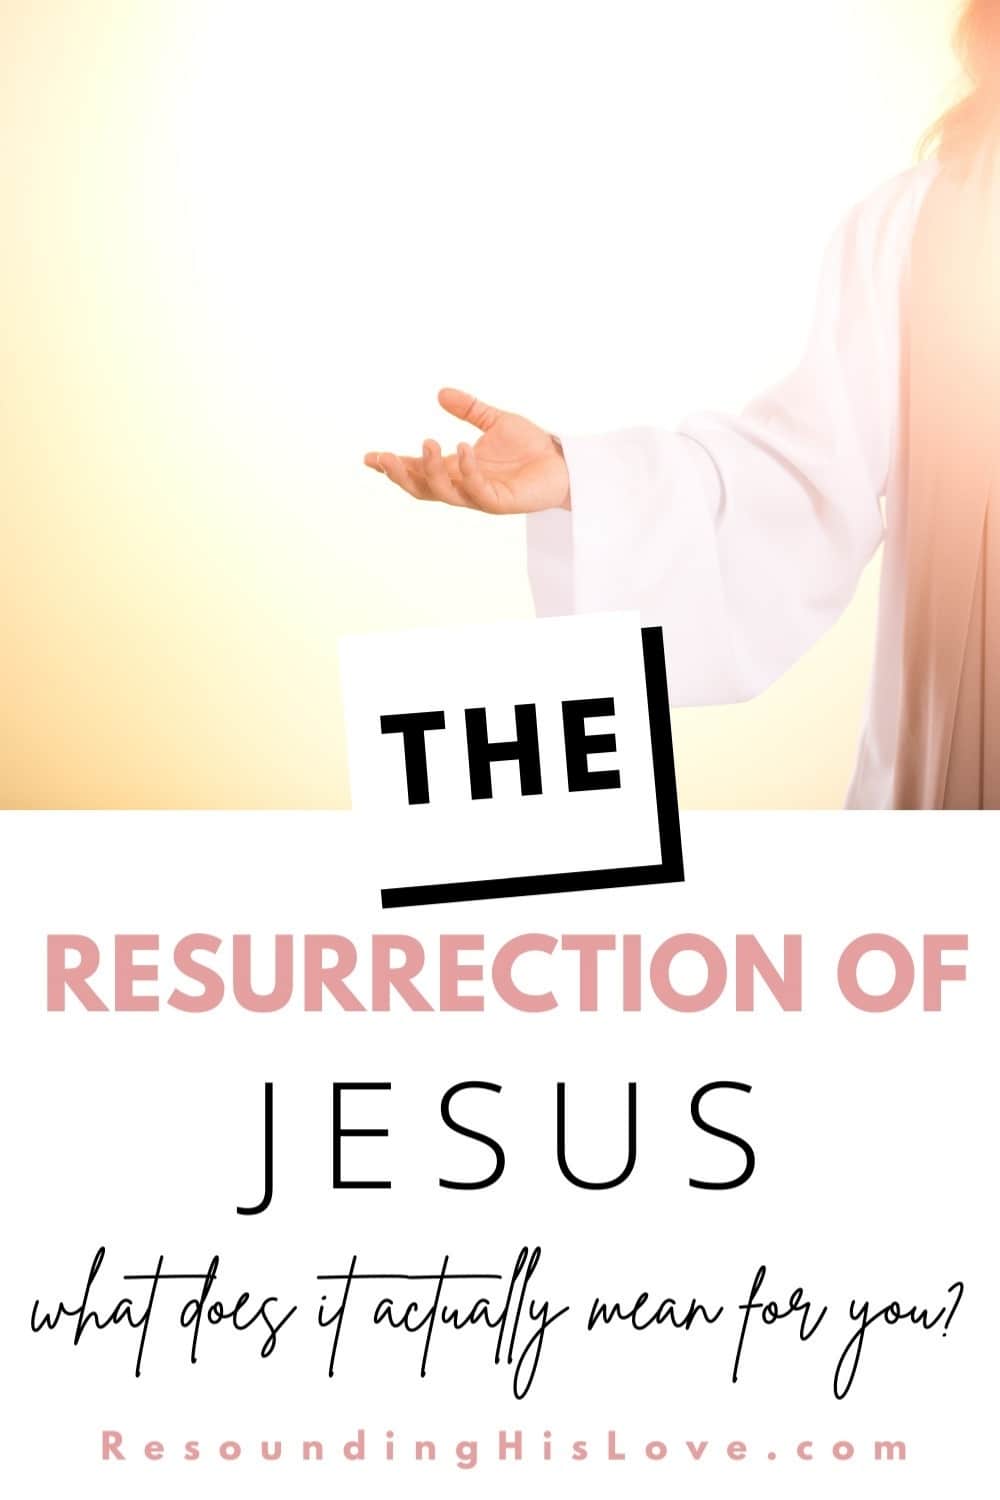 an image of a man wearing a white robe with arm extended and a bright light in the background with text The Resurrection of Jesus: What Does This Actually Mean for You?